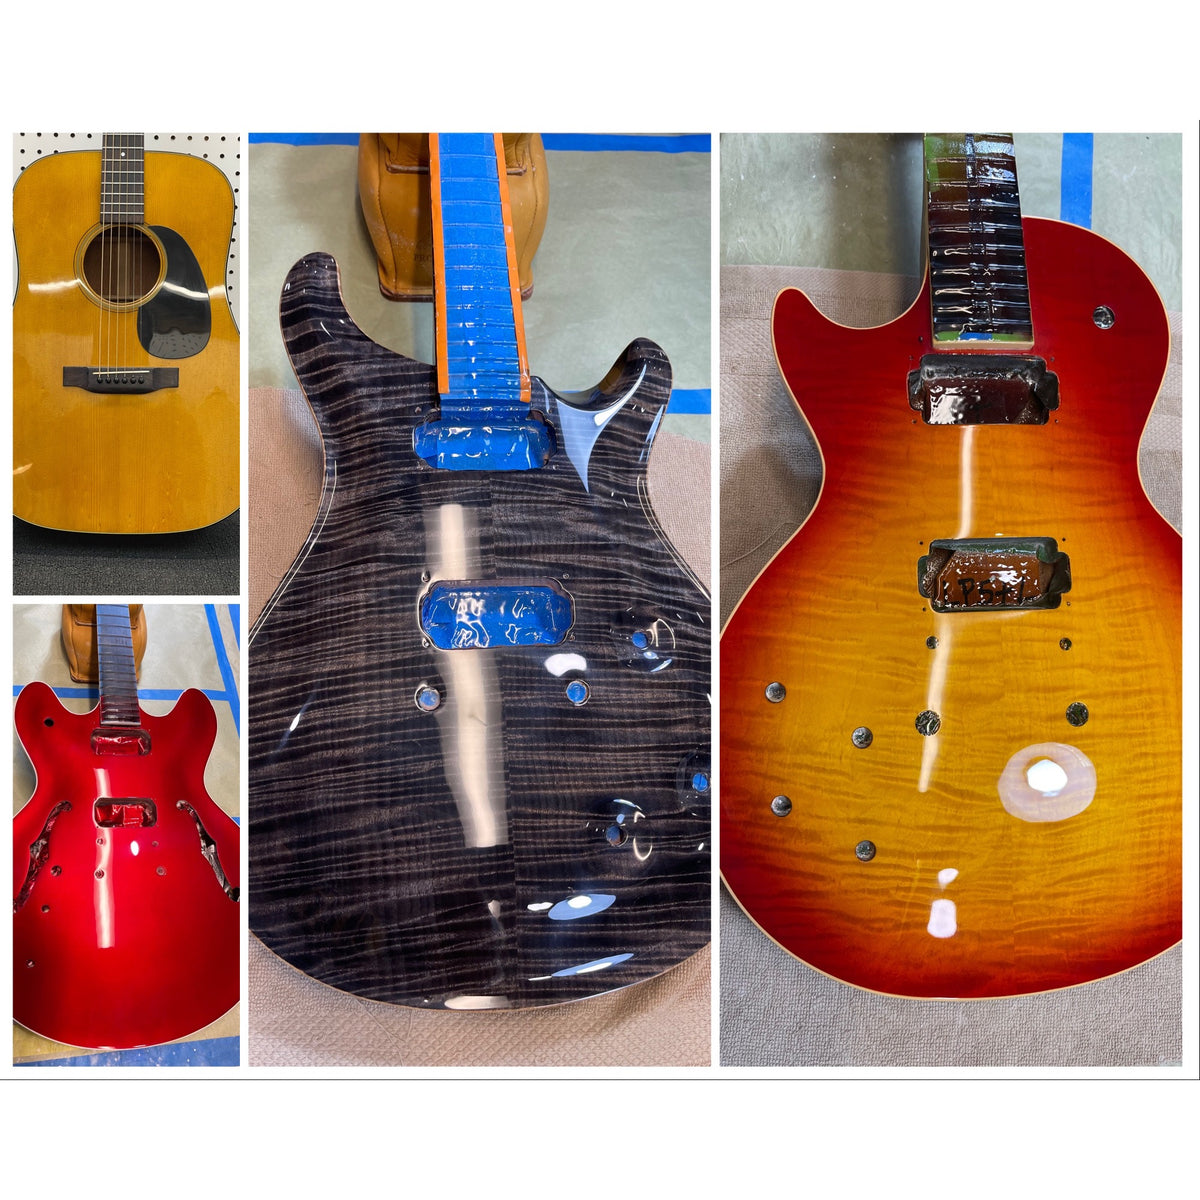 D28 Refinished-Gibson ES 335 Refinished-PRS Refinished- Gibson Les Paul Refinished